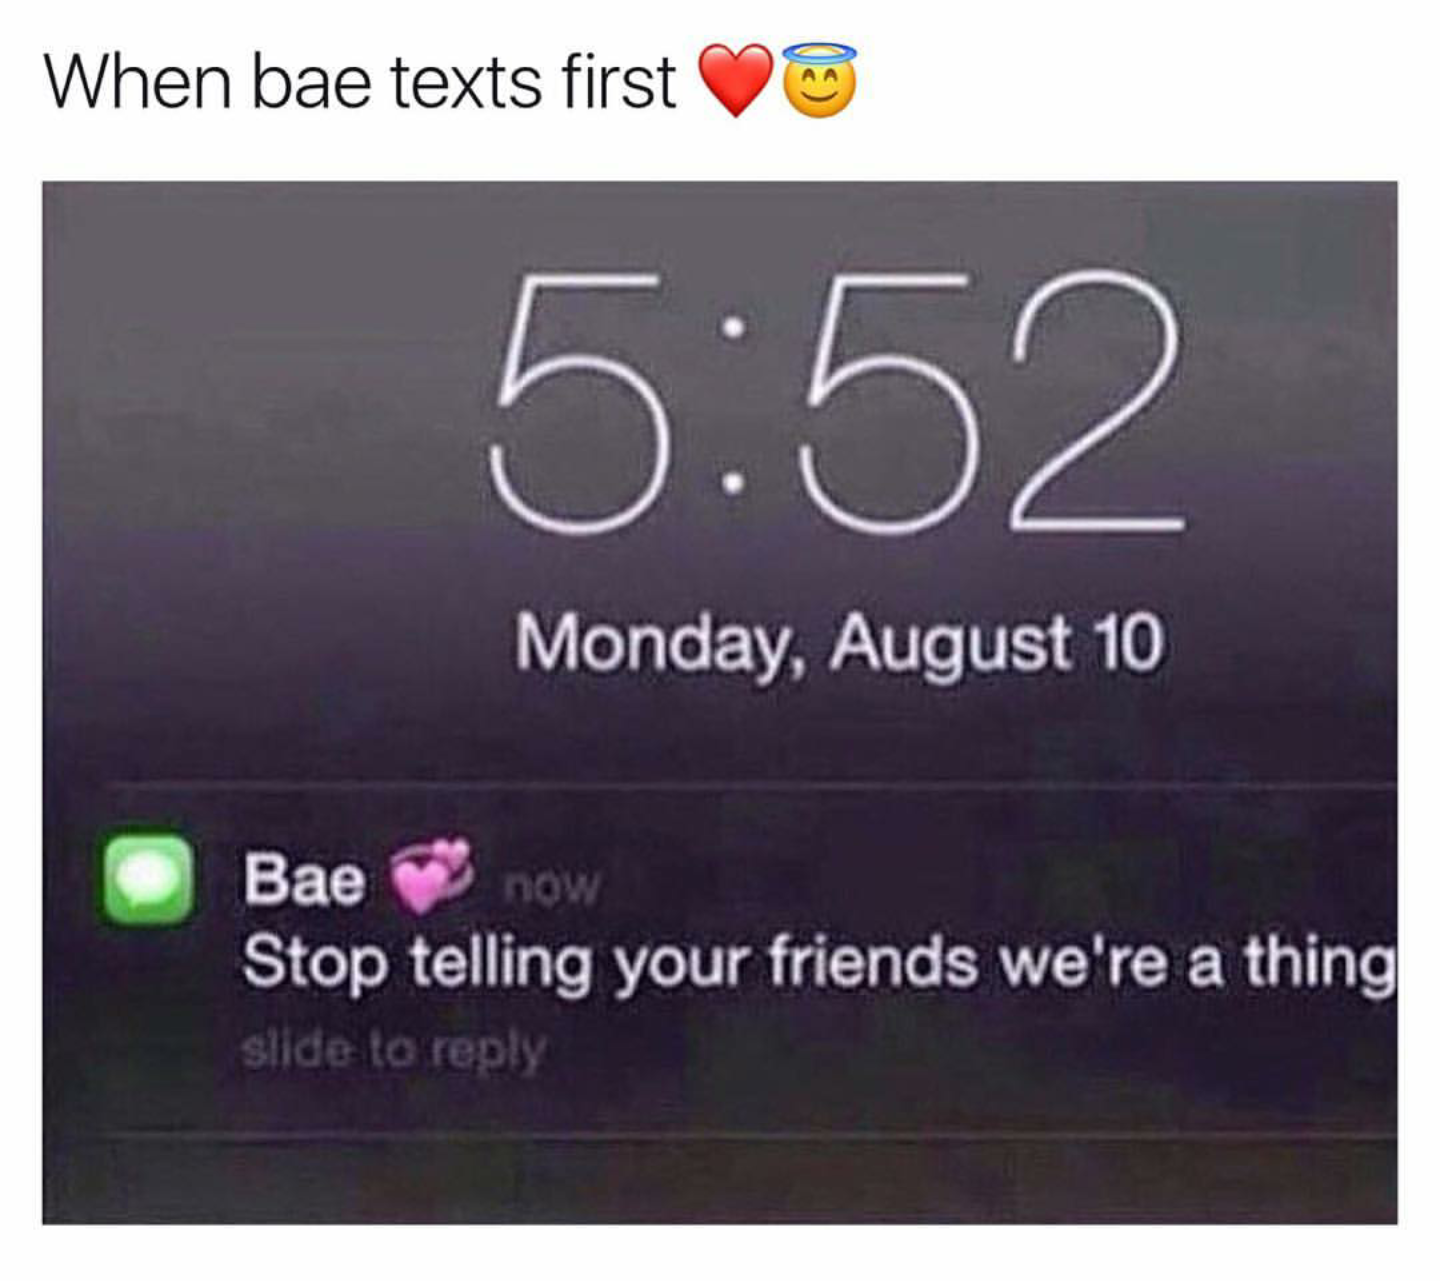 funny meme about multimedia - When bae texts first Monday, August 10 Bae now Stop telling your friends we're a thing silde to